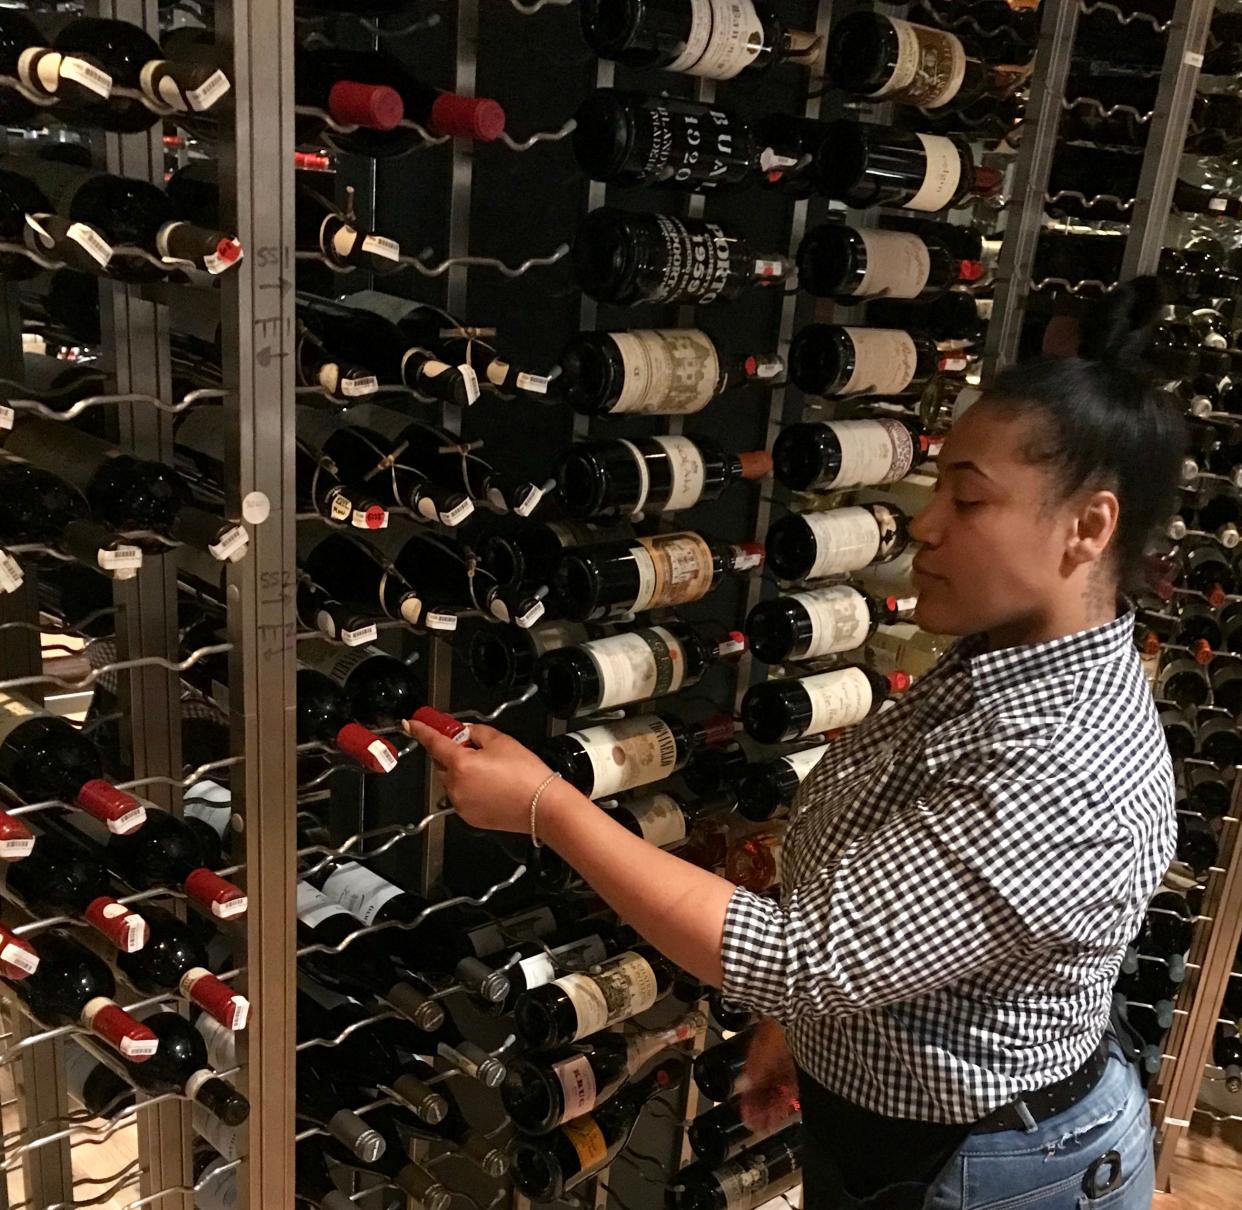 Amber Woods of Clinton, an employee at CAET in Ridgeland, pulls a bottle of wine from the restaurant's wine room.